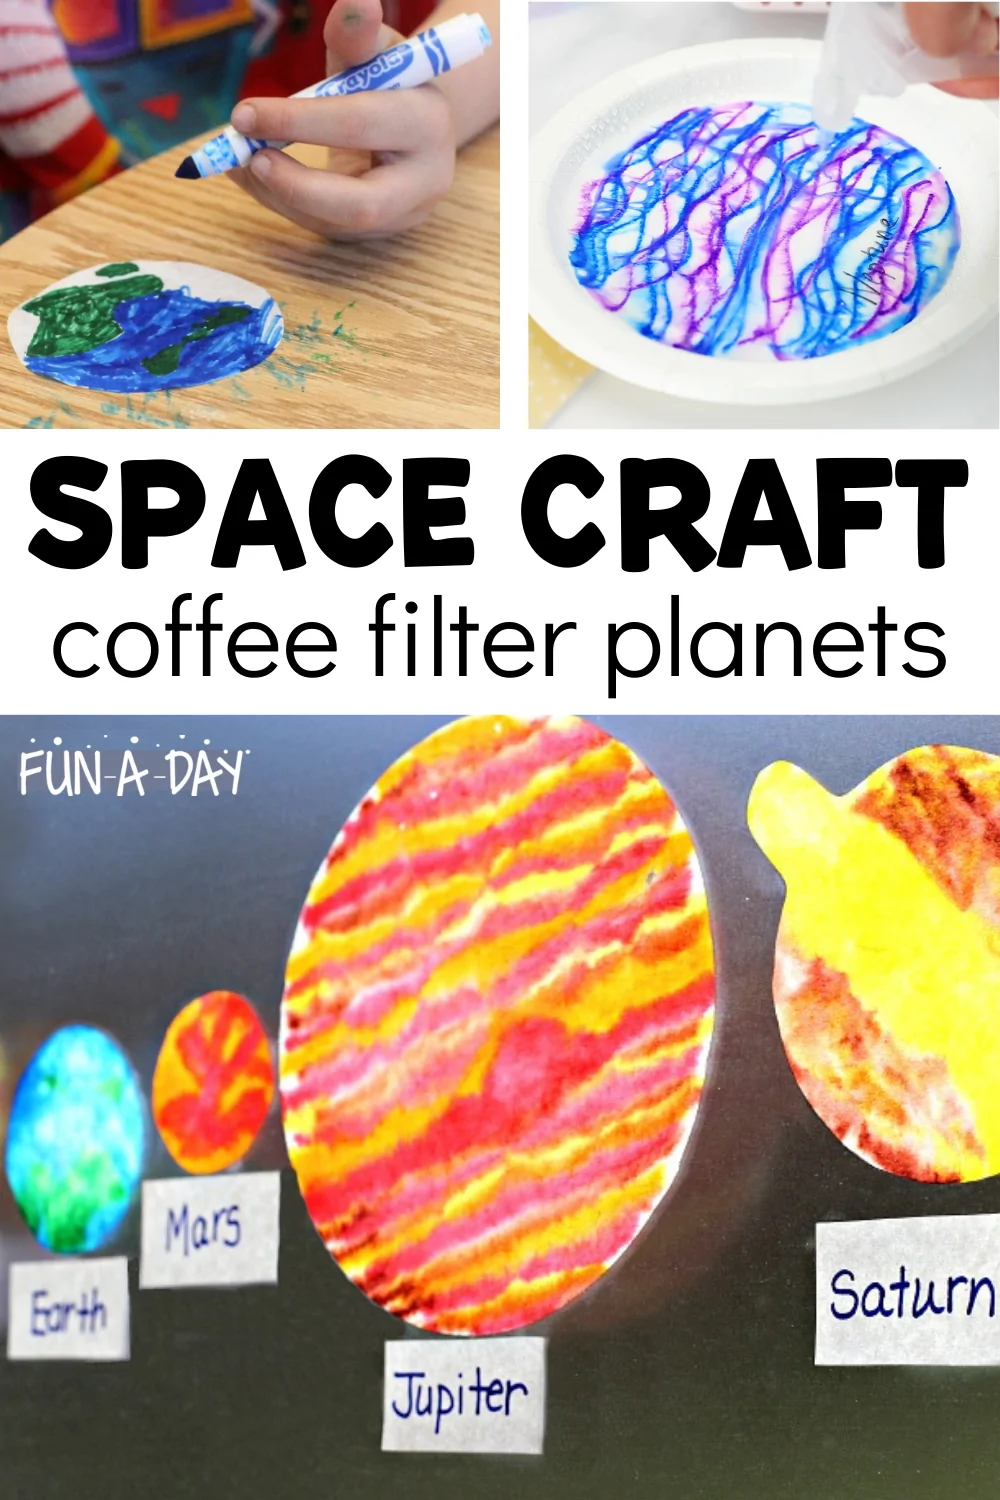 A child's hands are shown coloring a coffee filter with marker. Several planets that have been made from coffee filters are also shown.